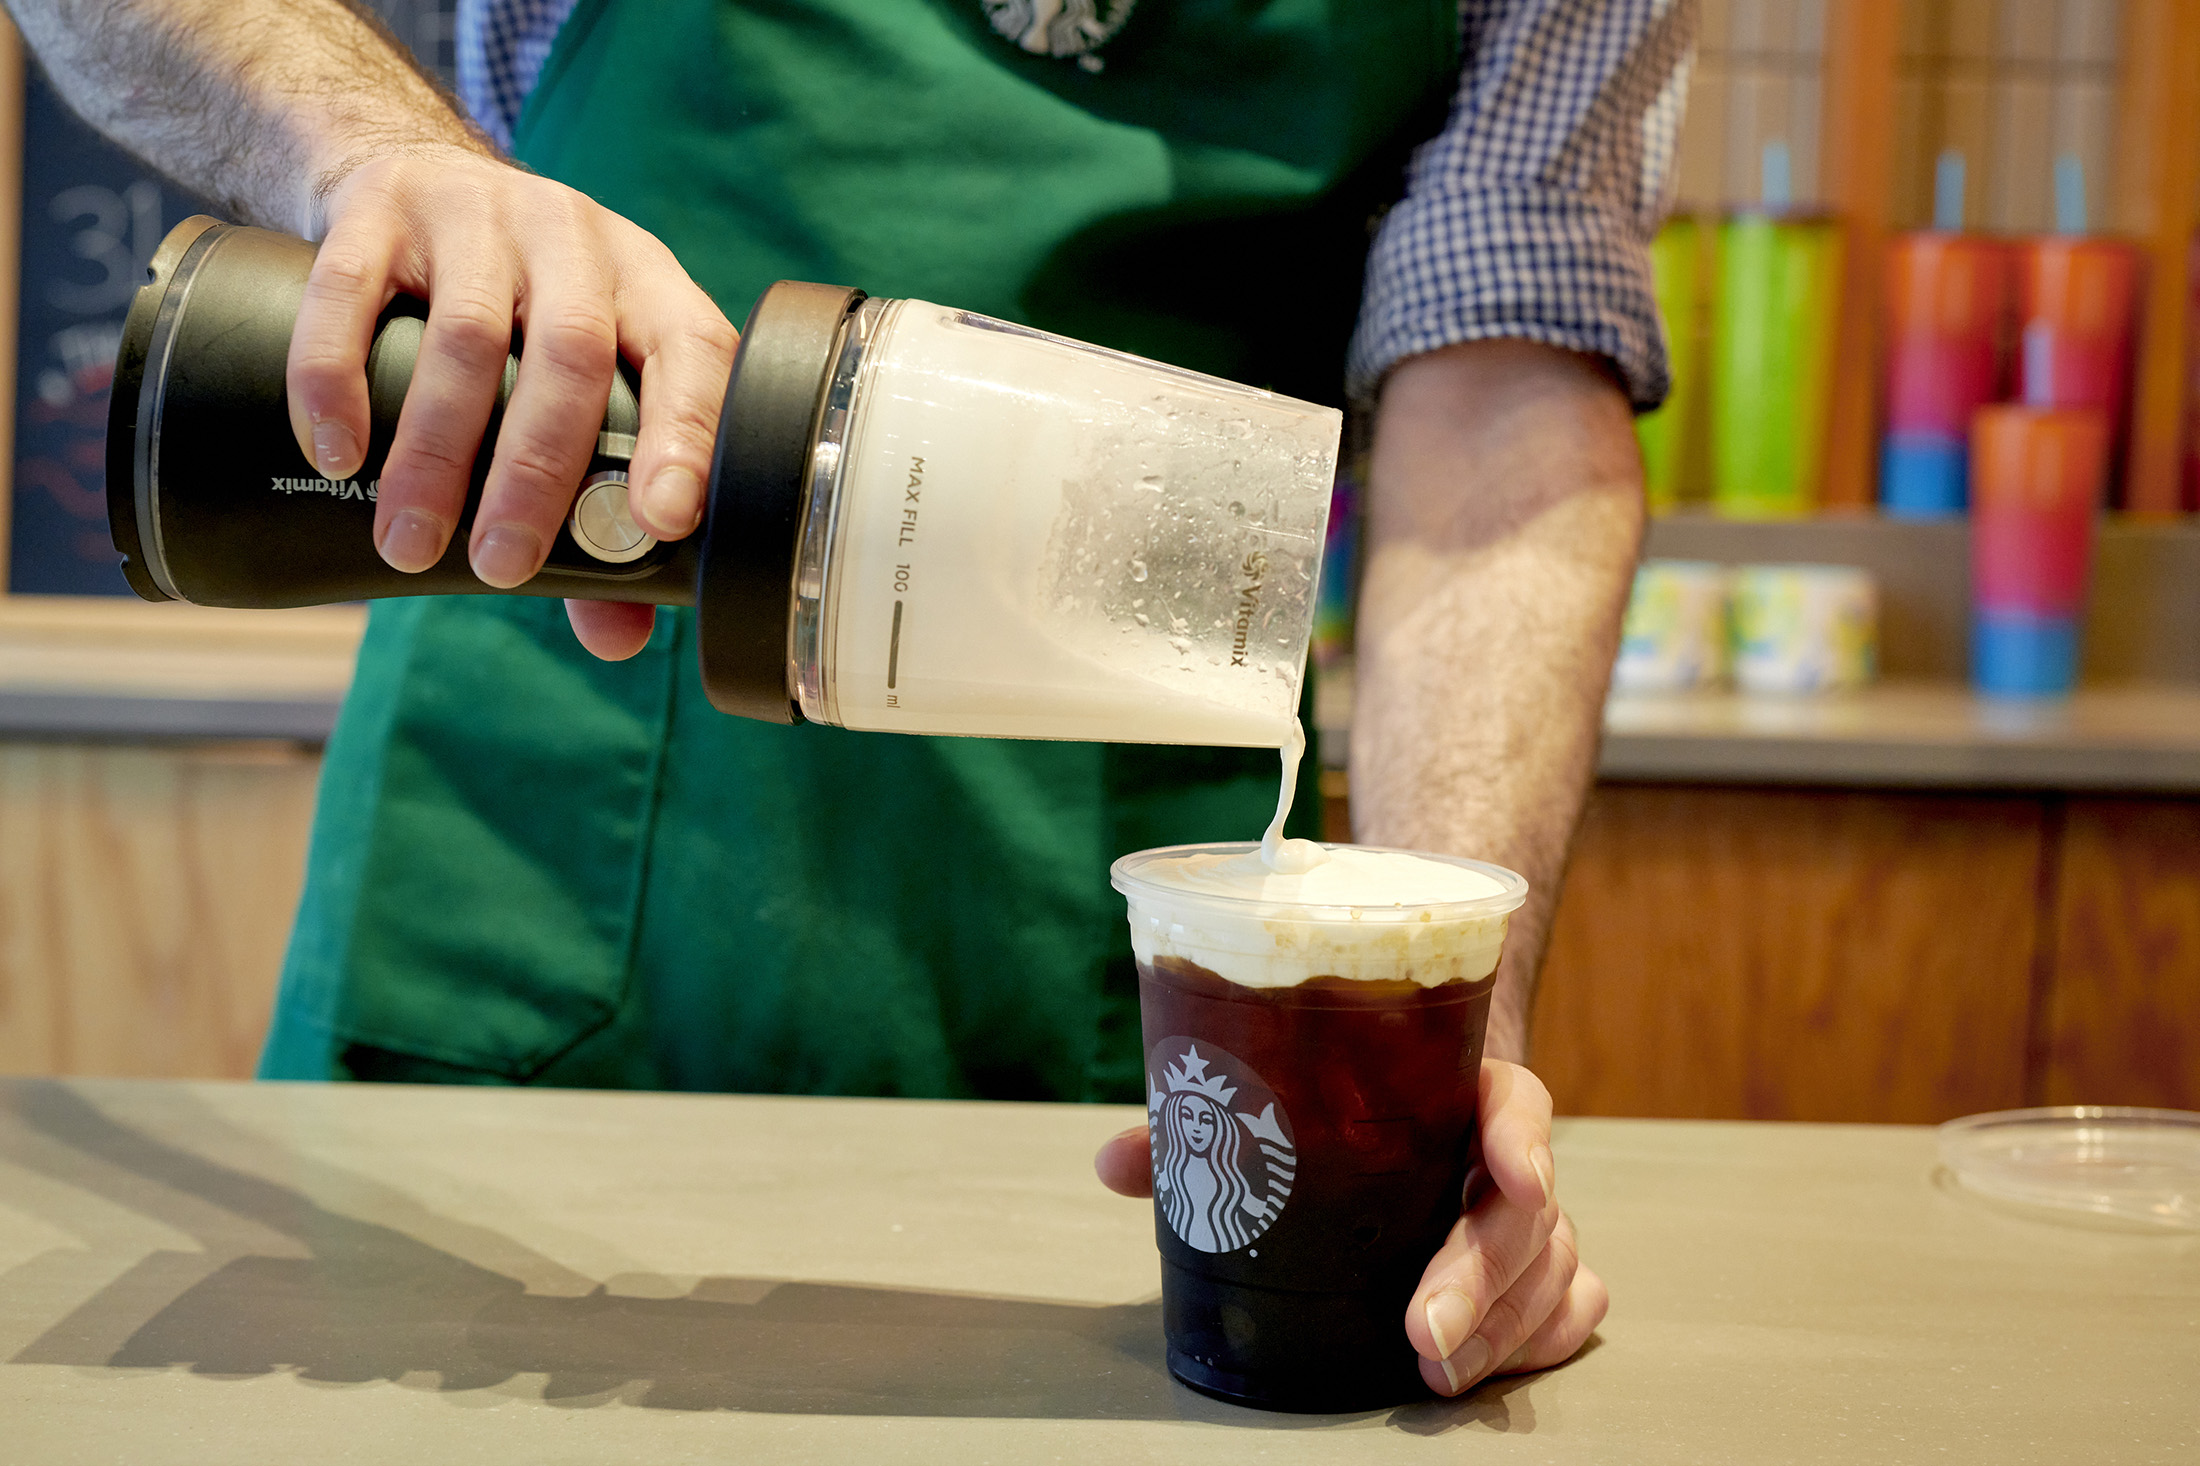 Latest in innovation: the New Portable Cold Foamer! Developed in under, Starbucks